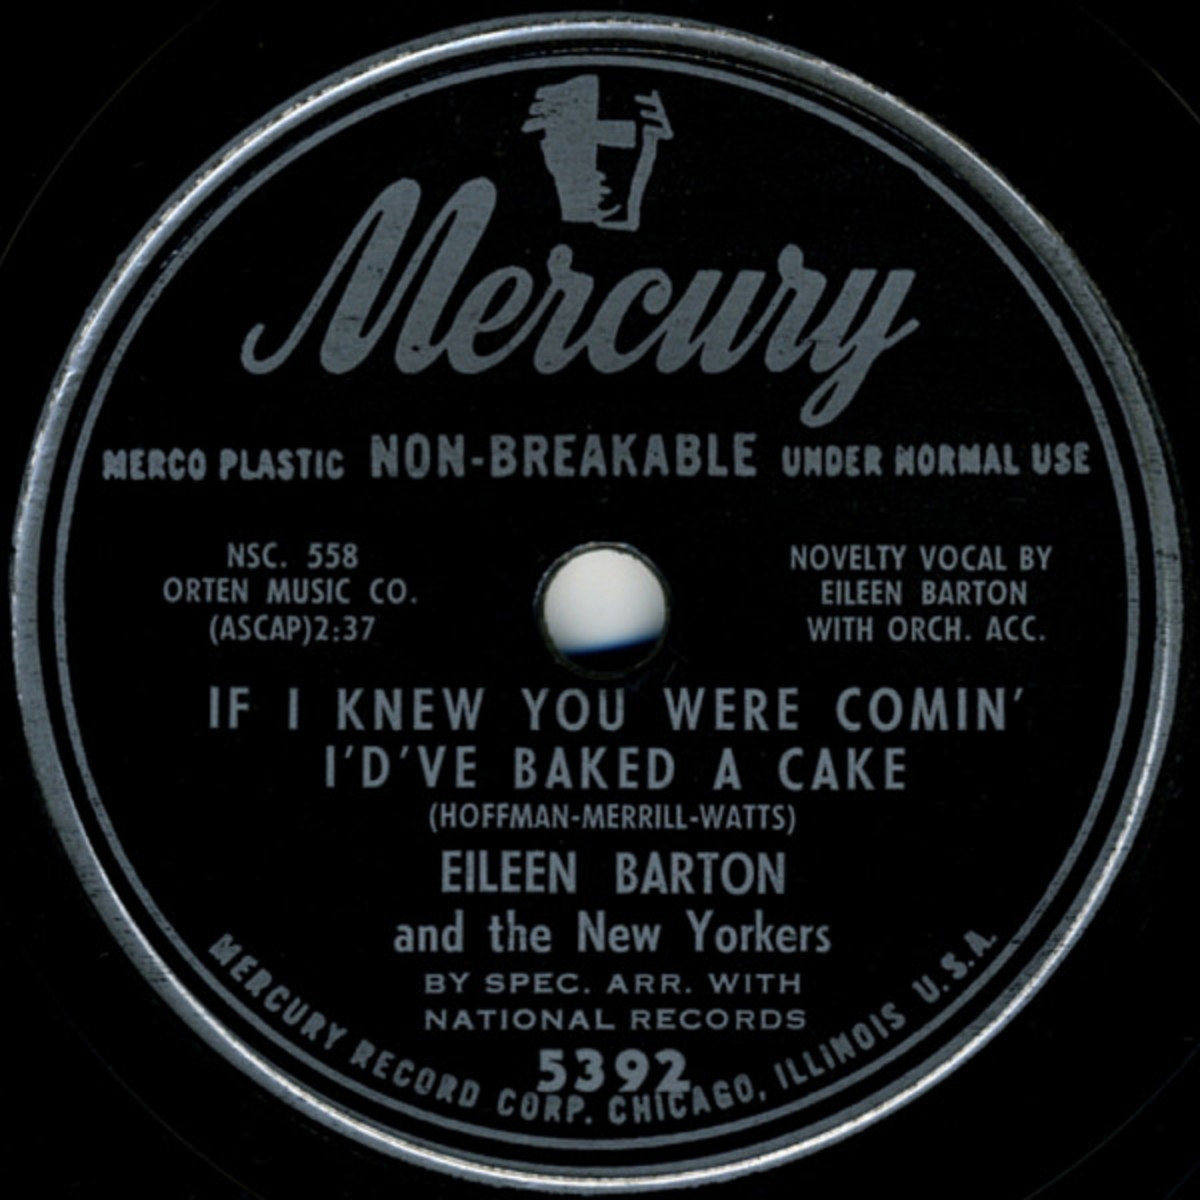 If I Knew You Were Comin’ I’d’ve Baked a Cake, Eileen Barton and The New Yorkers, Mercury 78-5392